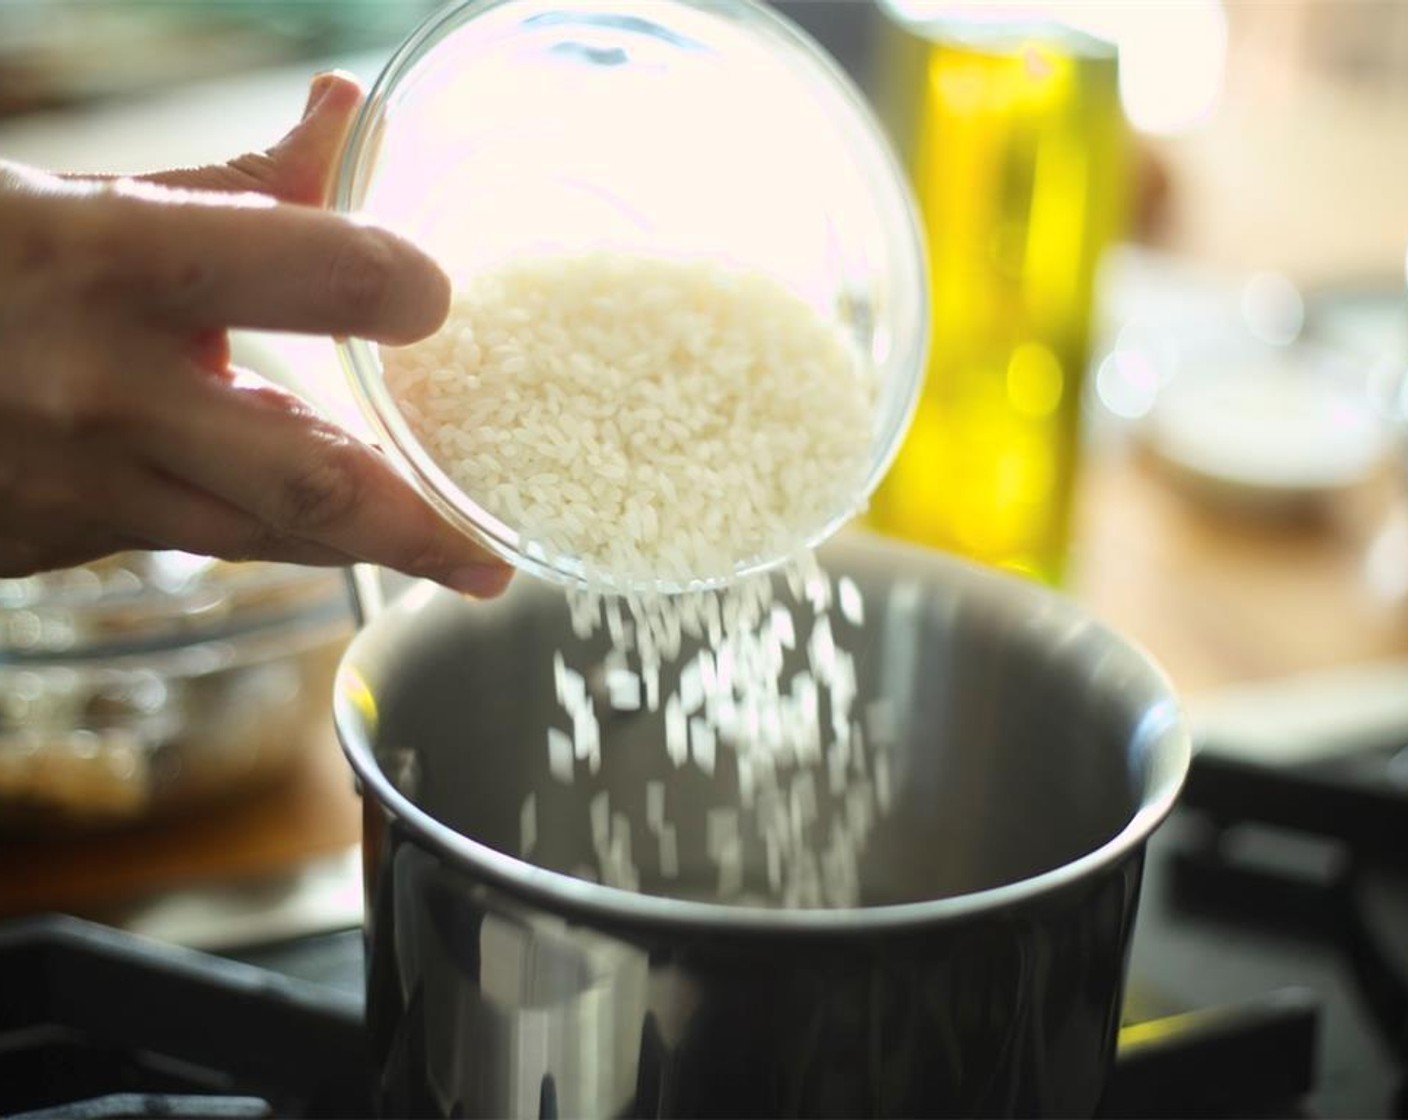 step 2 In a small saucepan, add one cup of cold water with Glutinous Rice (1/2 cup) and stir.